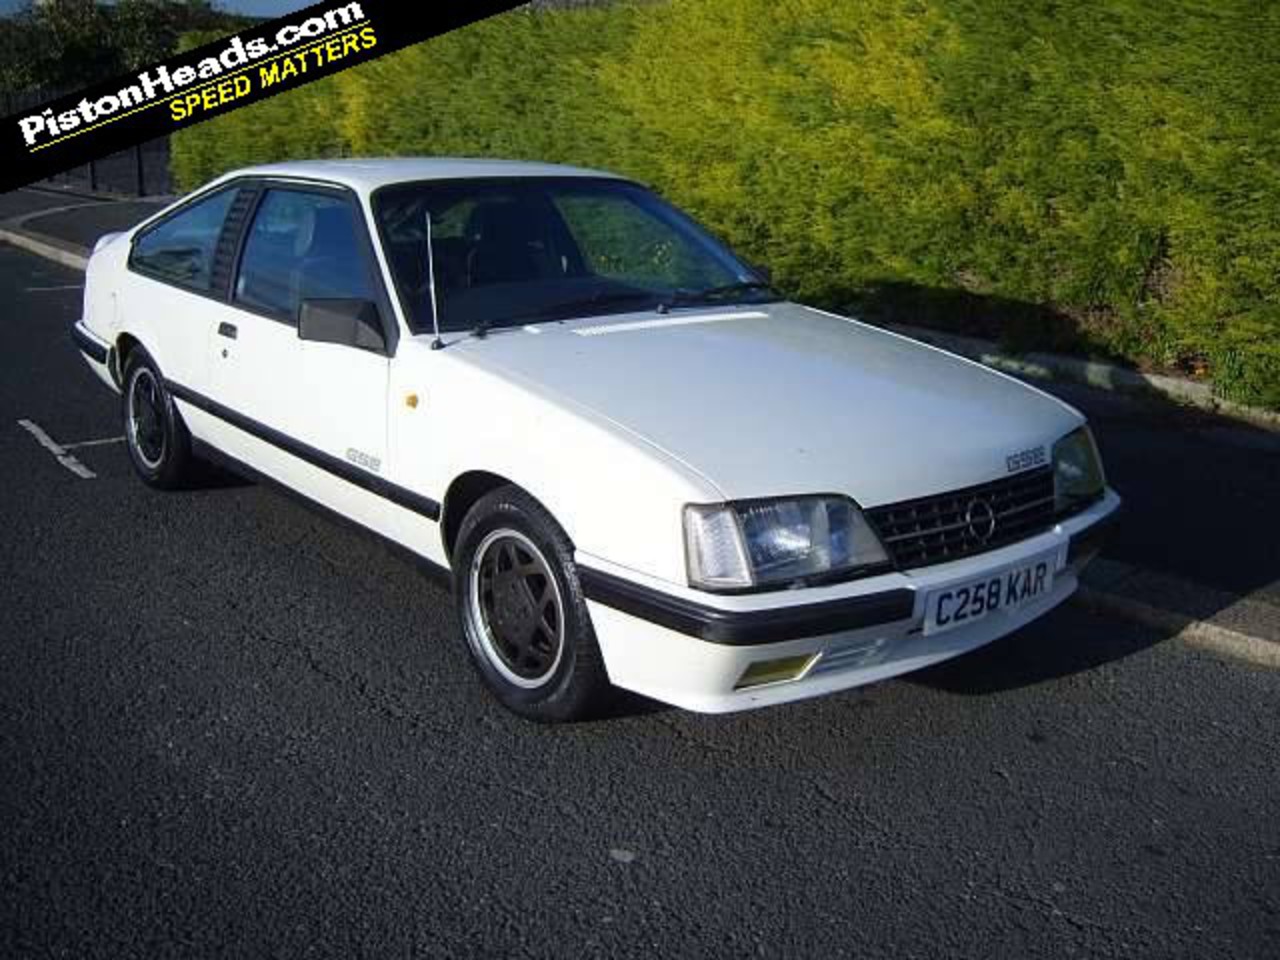 Step forward the Opel Monza. Like the Manta they used to be a fairly common